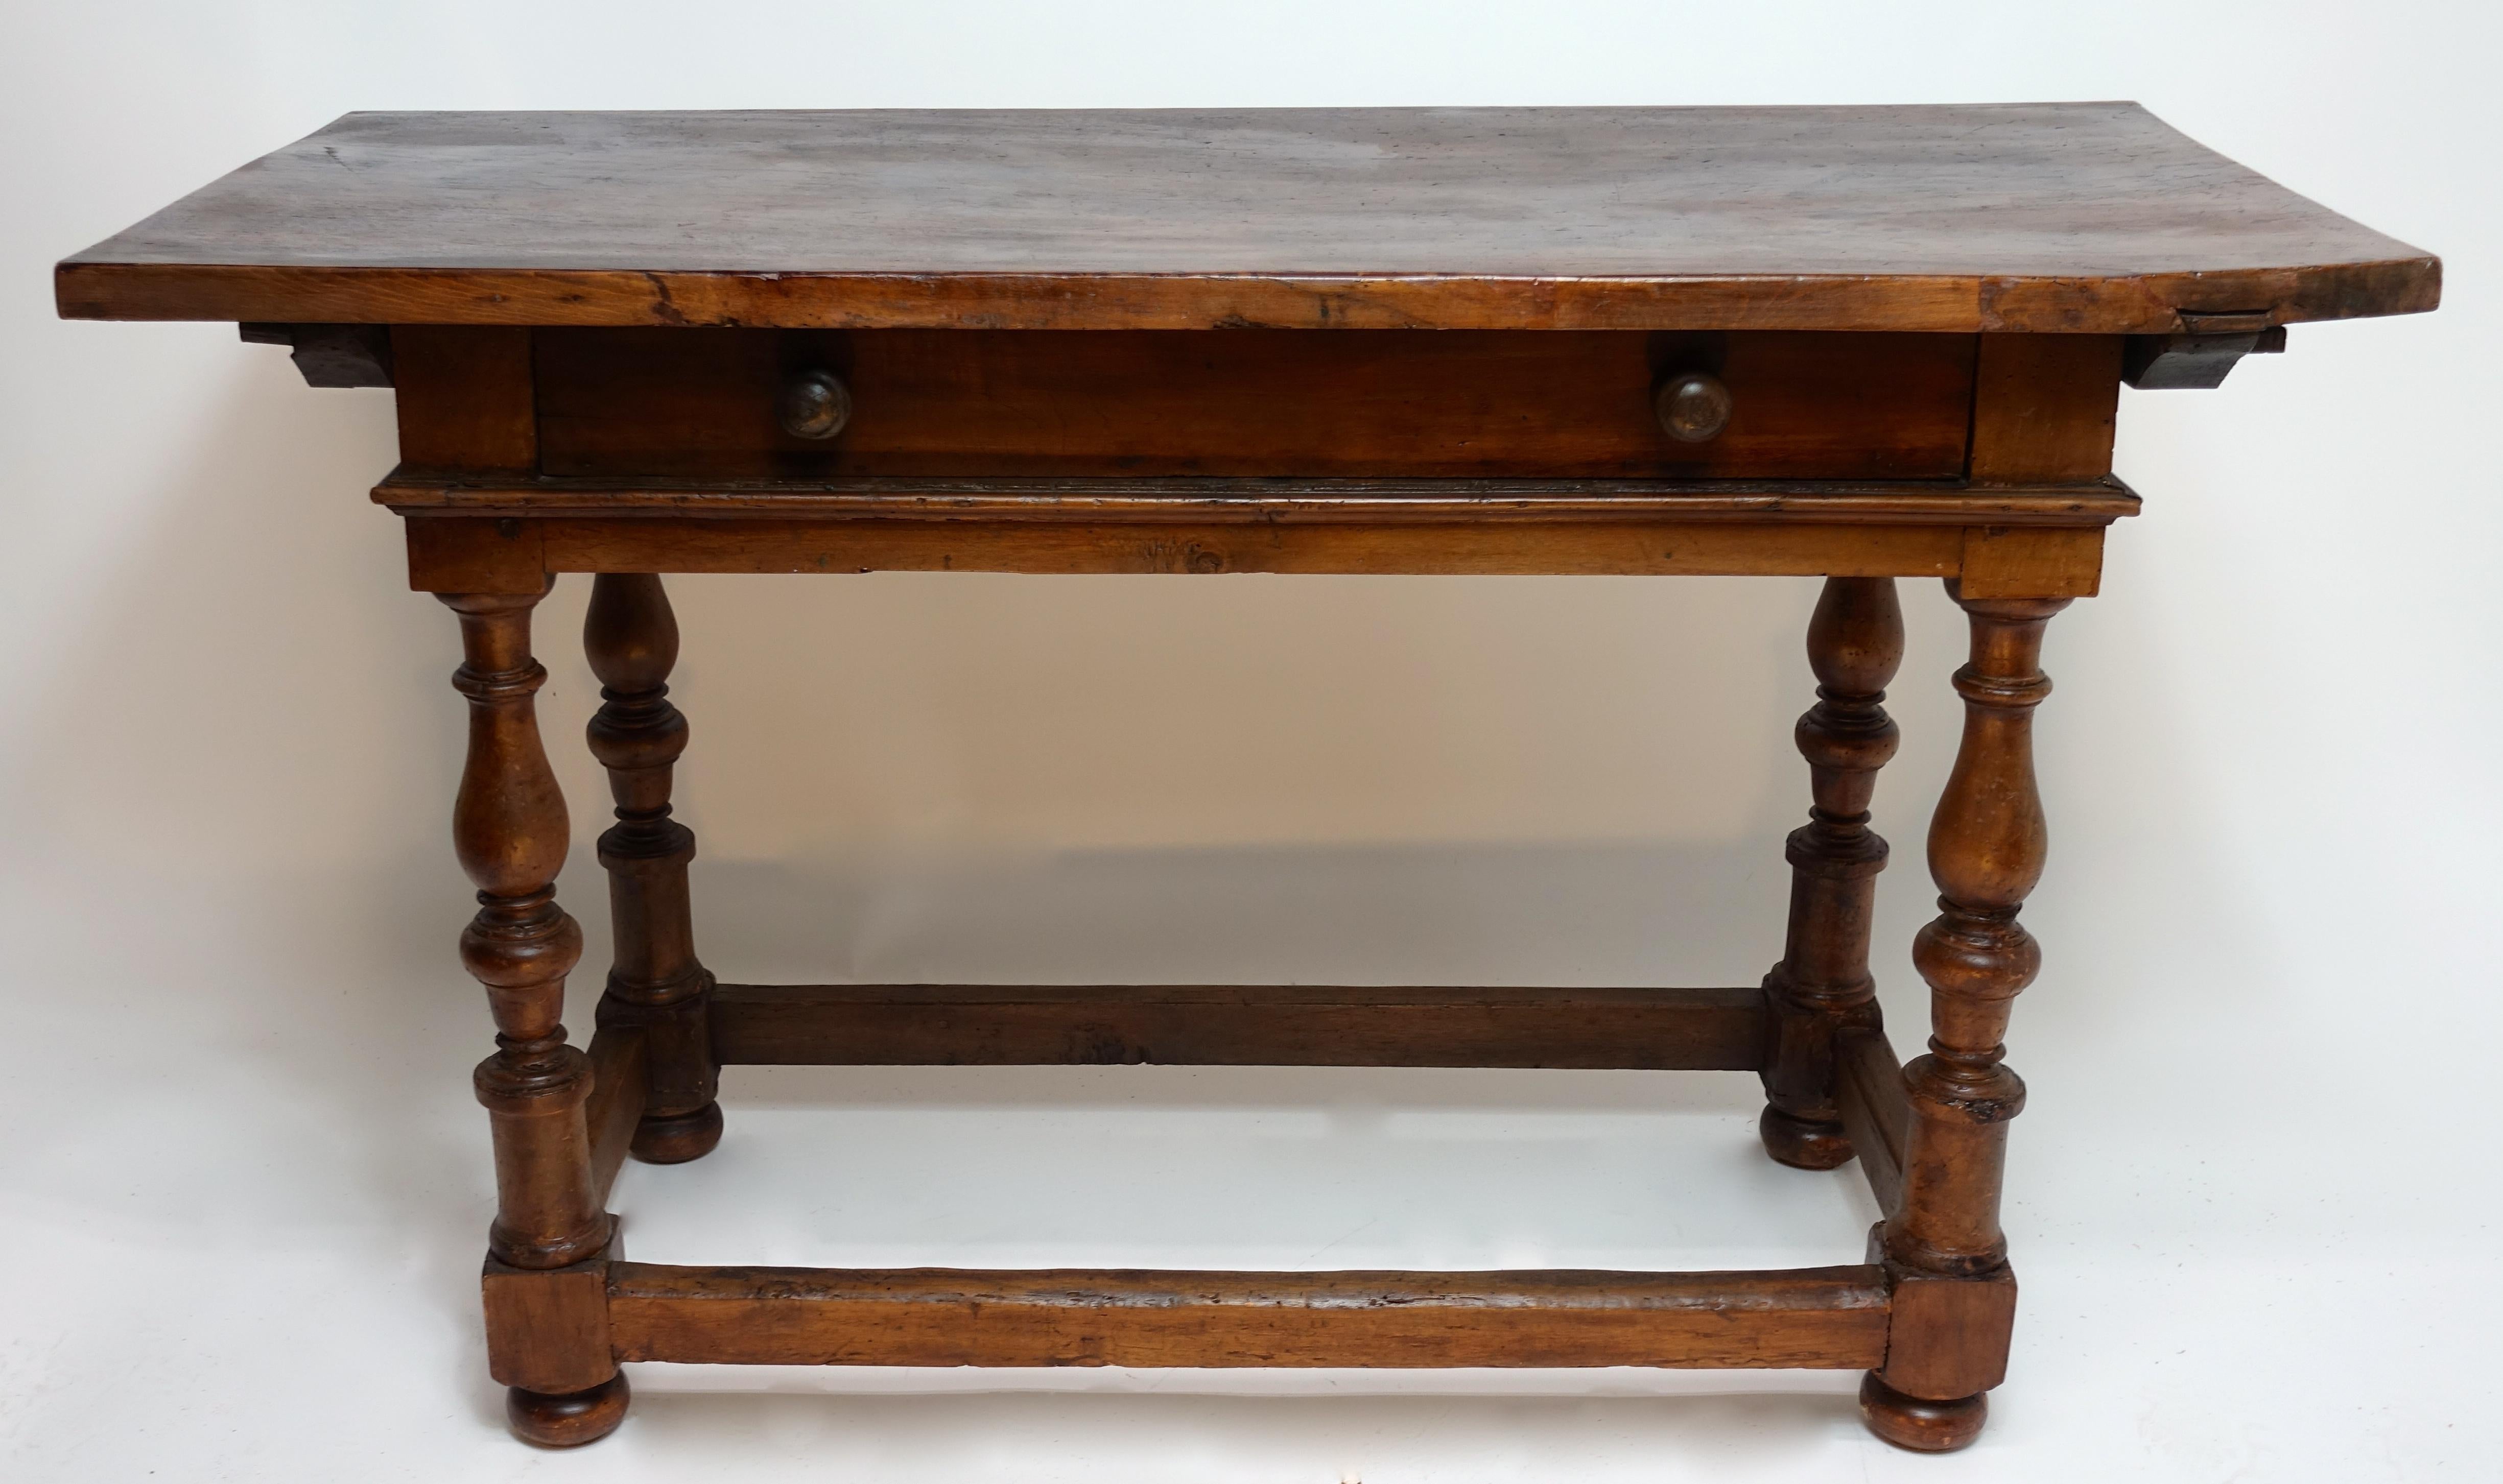 Wonderful 18th Century Italian Walnut table with a large single drawer, the top removable and fastened with wood pegs, hand carved turned legs with low stretchers sitting on bun feet. 

